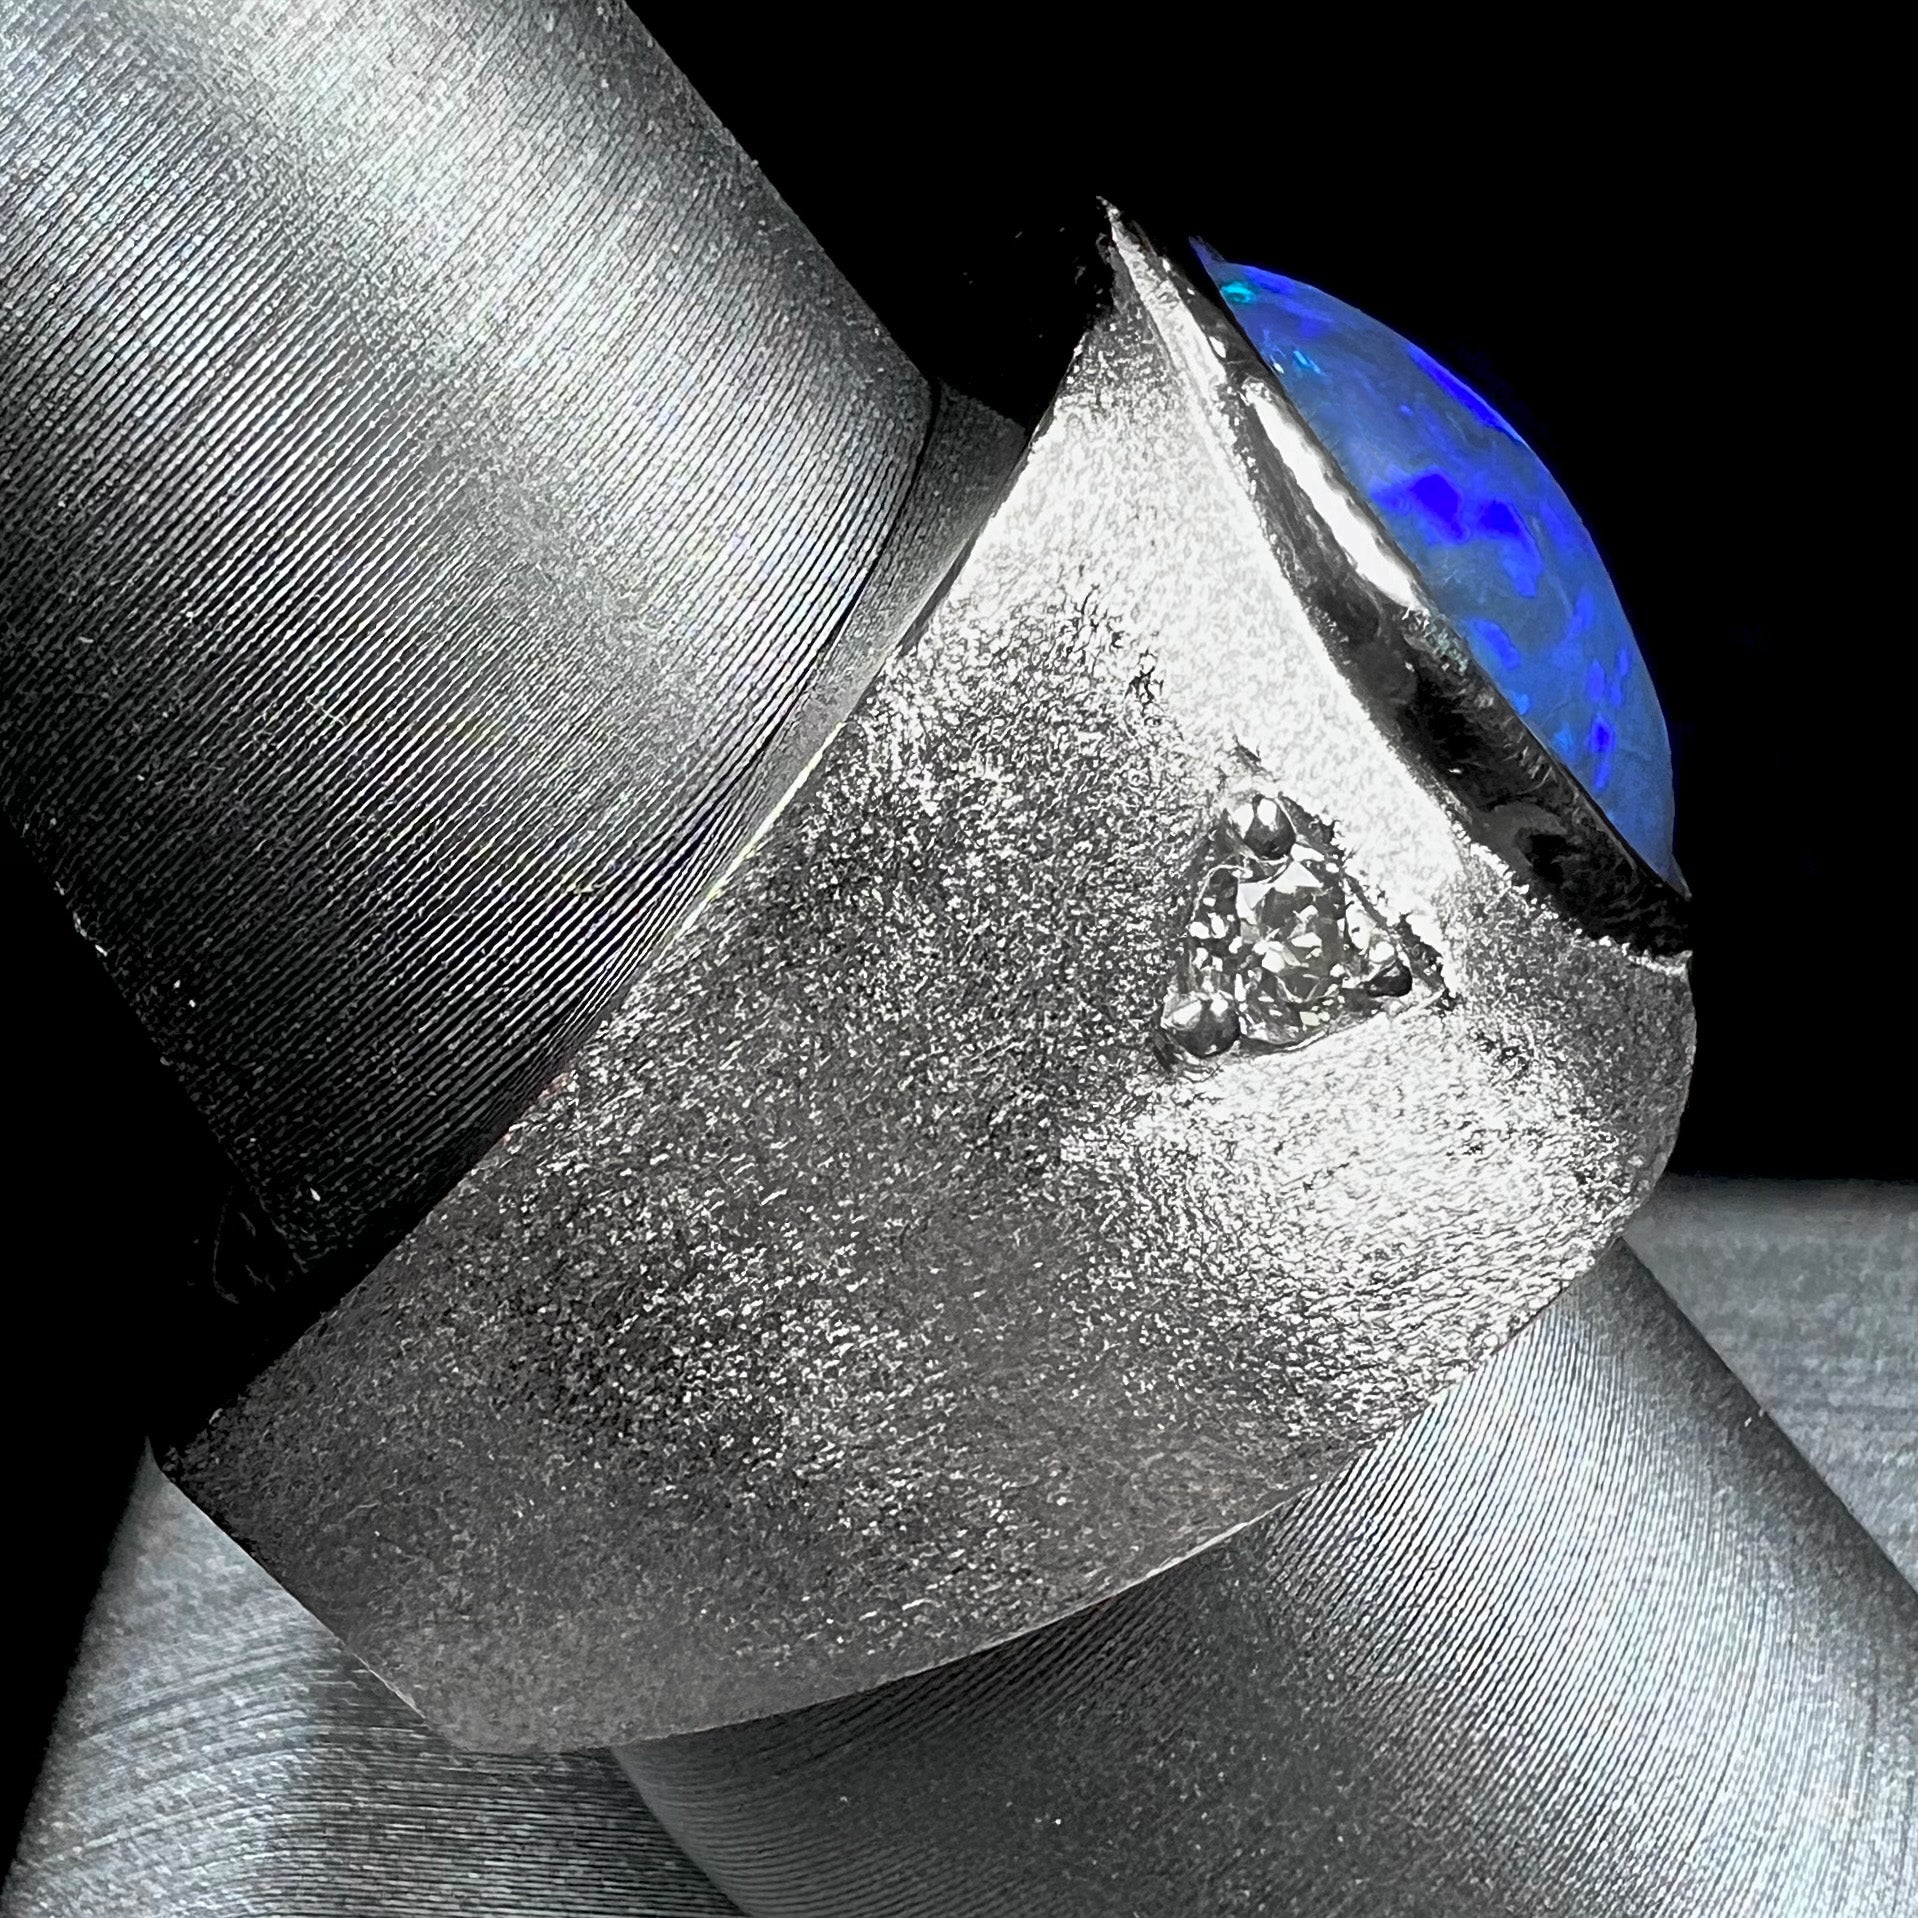 A men's natural black opal and diamond ring cast with a matte finish in white gold.